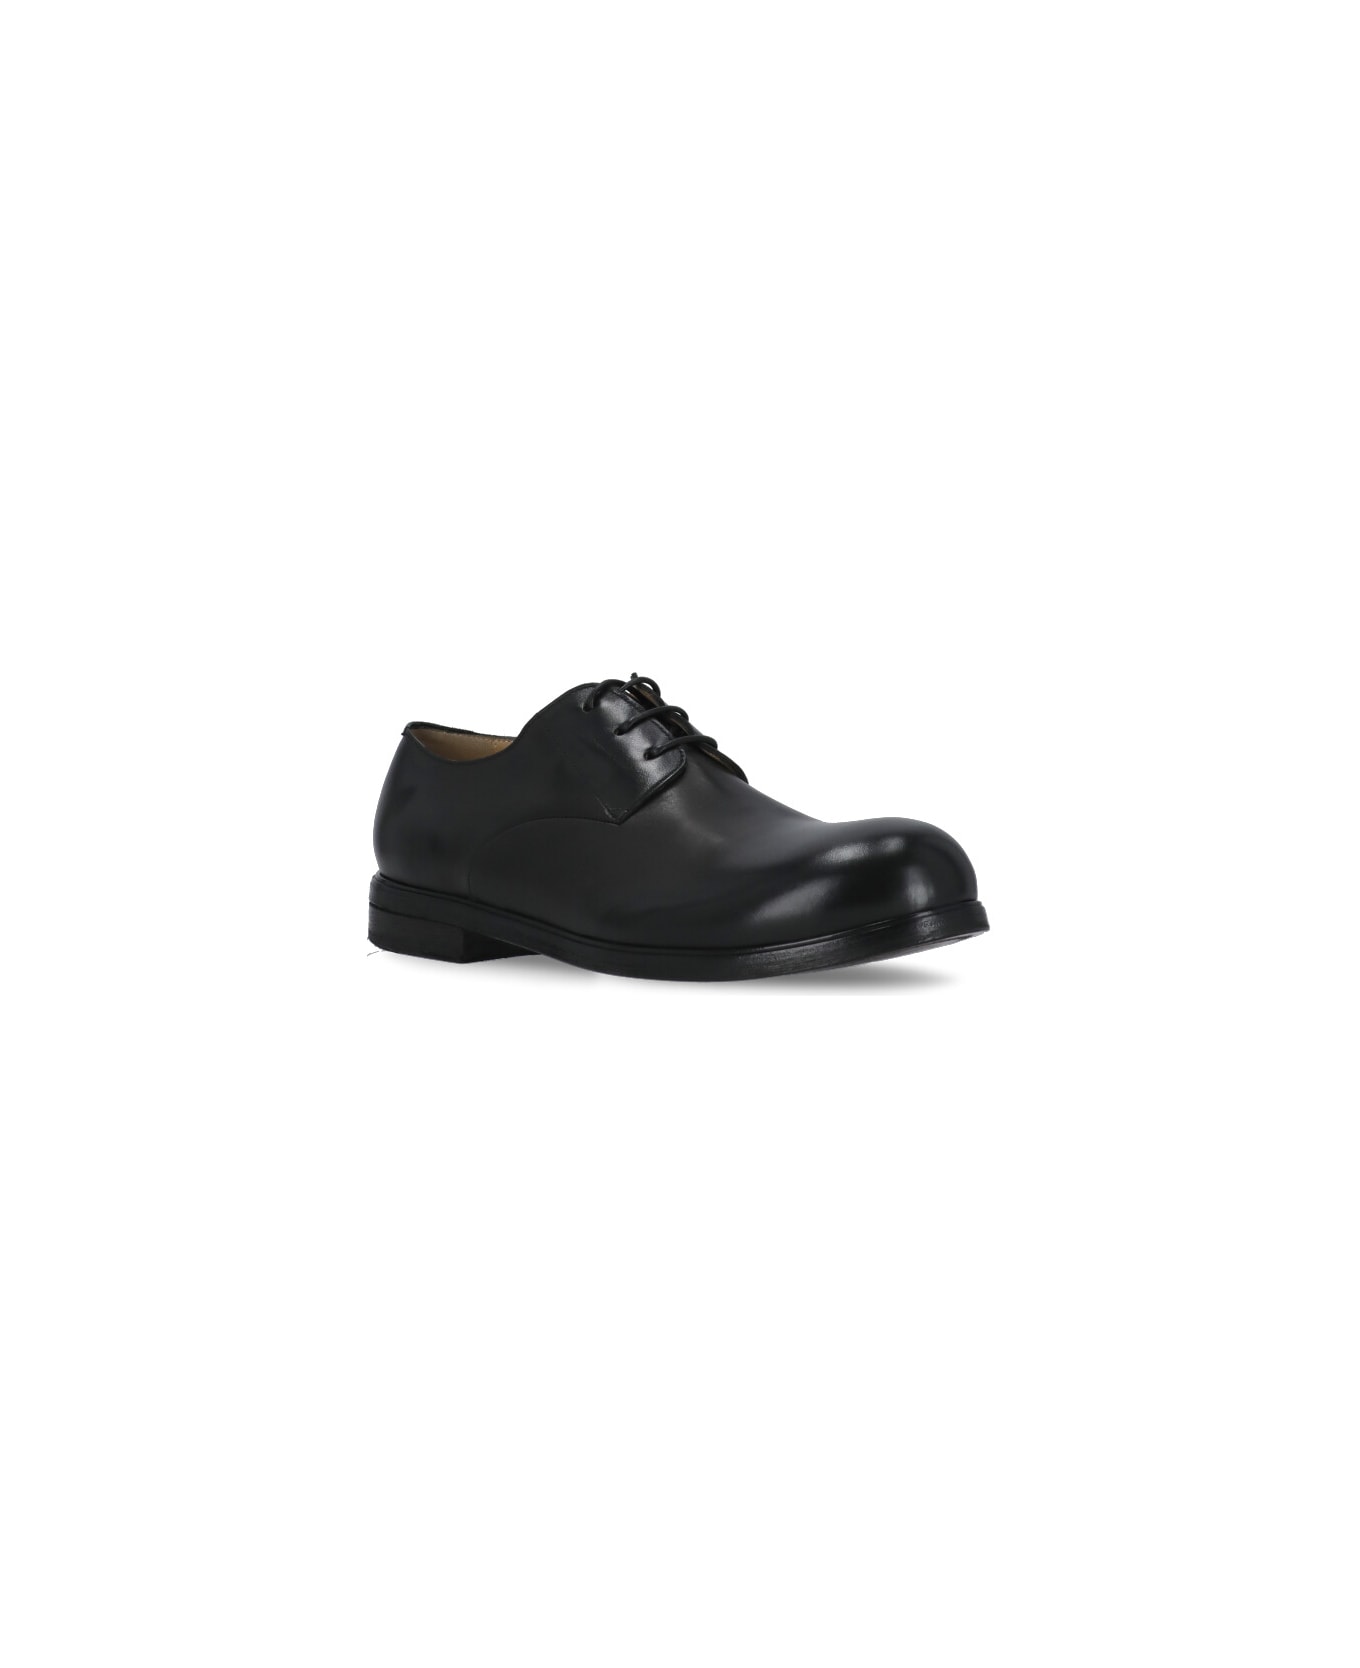 Marsell Zucca Media Lace Up Shoes - Black